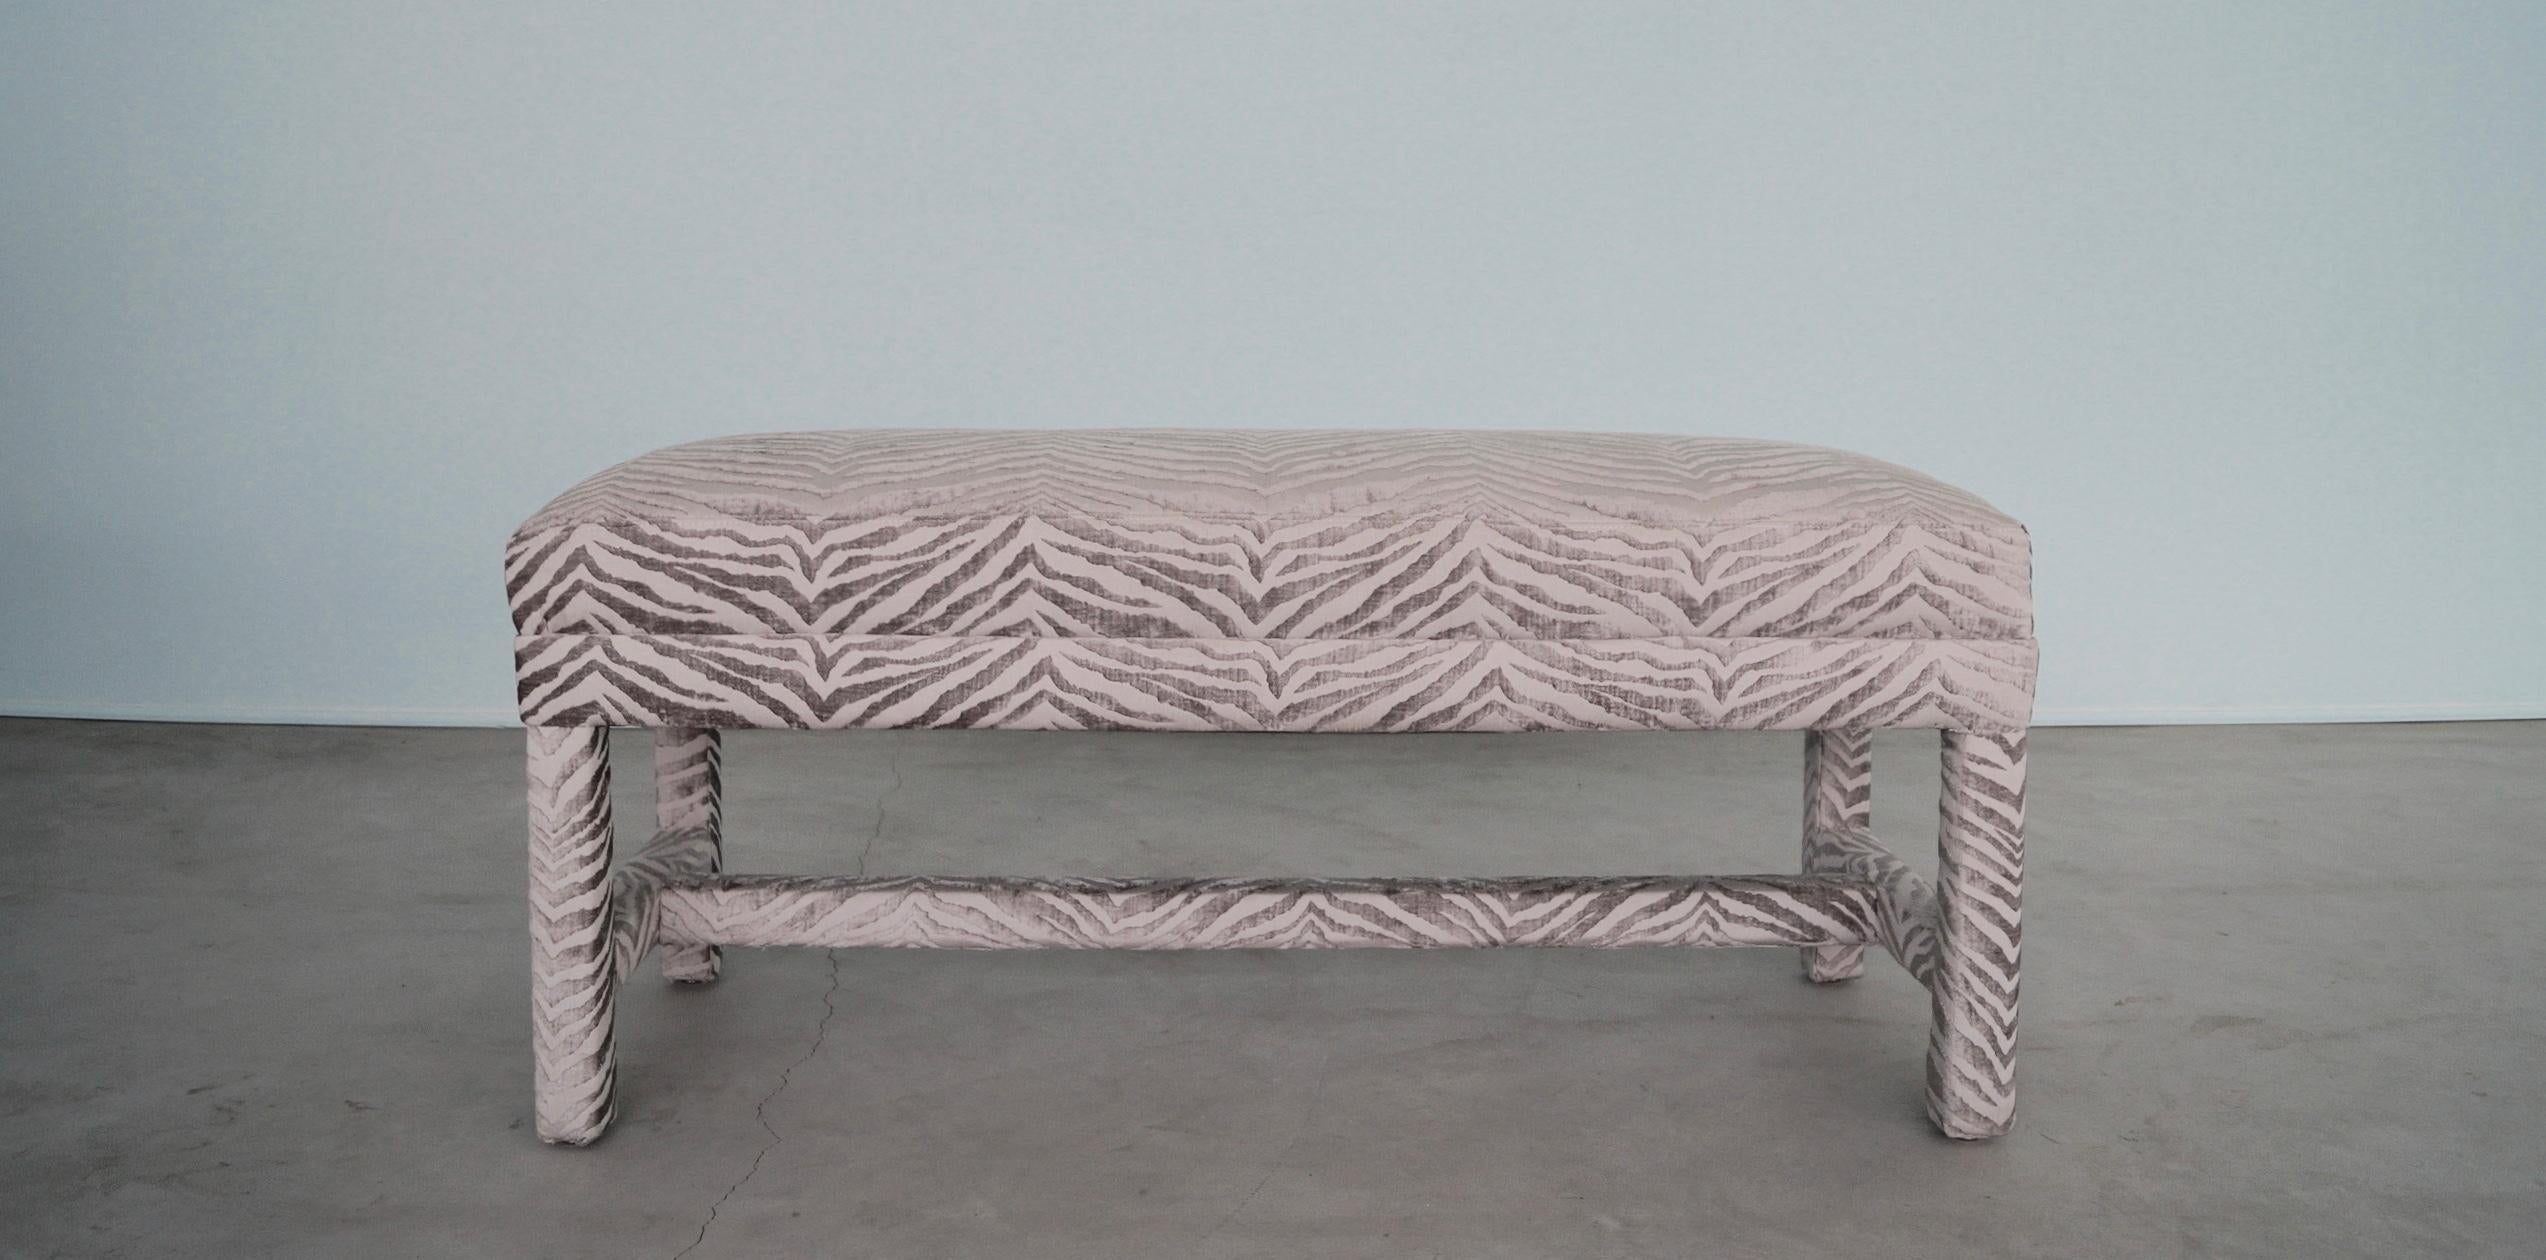 We have this gorgeous vintage Mid-century Modern designer bench for sale. It has been professionally reupholstered in a designer textured chenille, and looks outstanding! It's a parsons bench, and the fabric is incredibly stunning! It's a